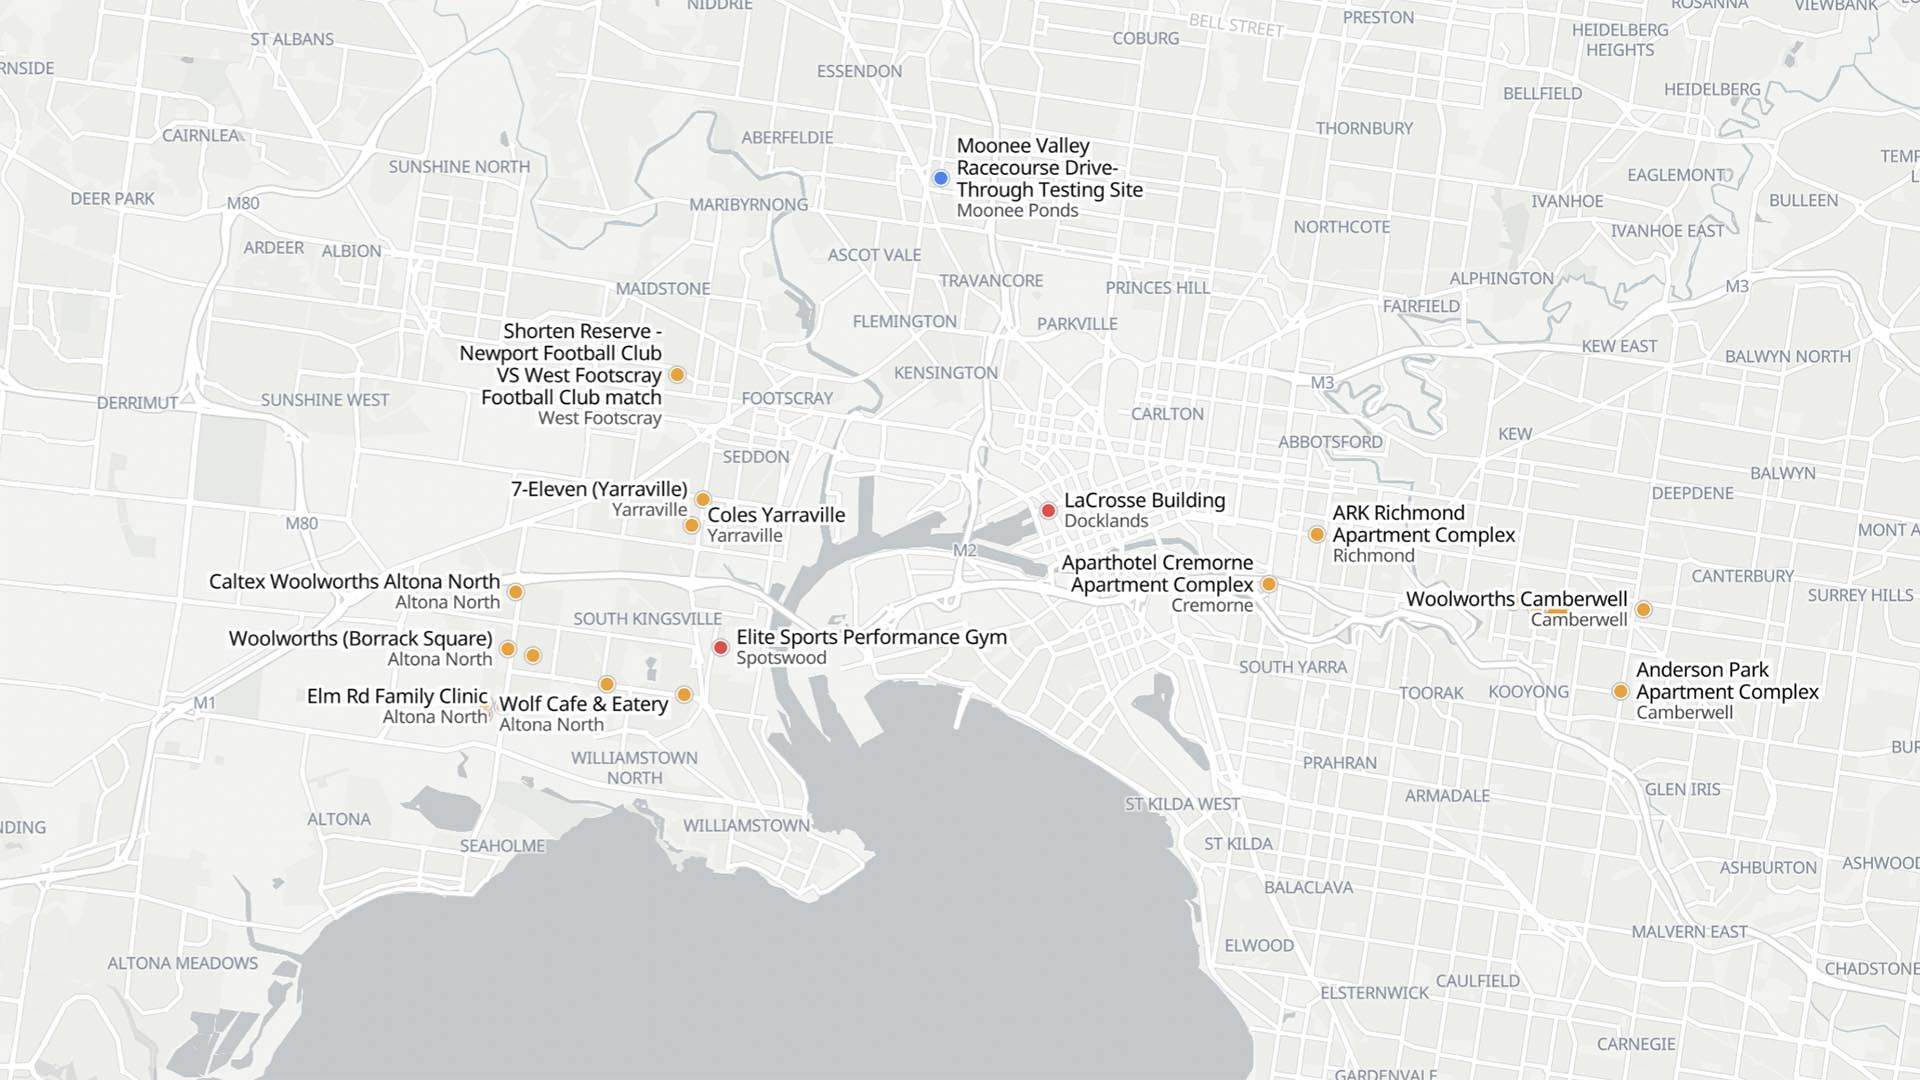 This Interactive Map Shows COVID-19 Case Alerts for Victorian Venues